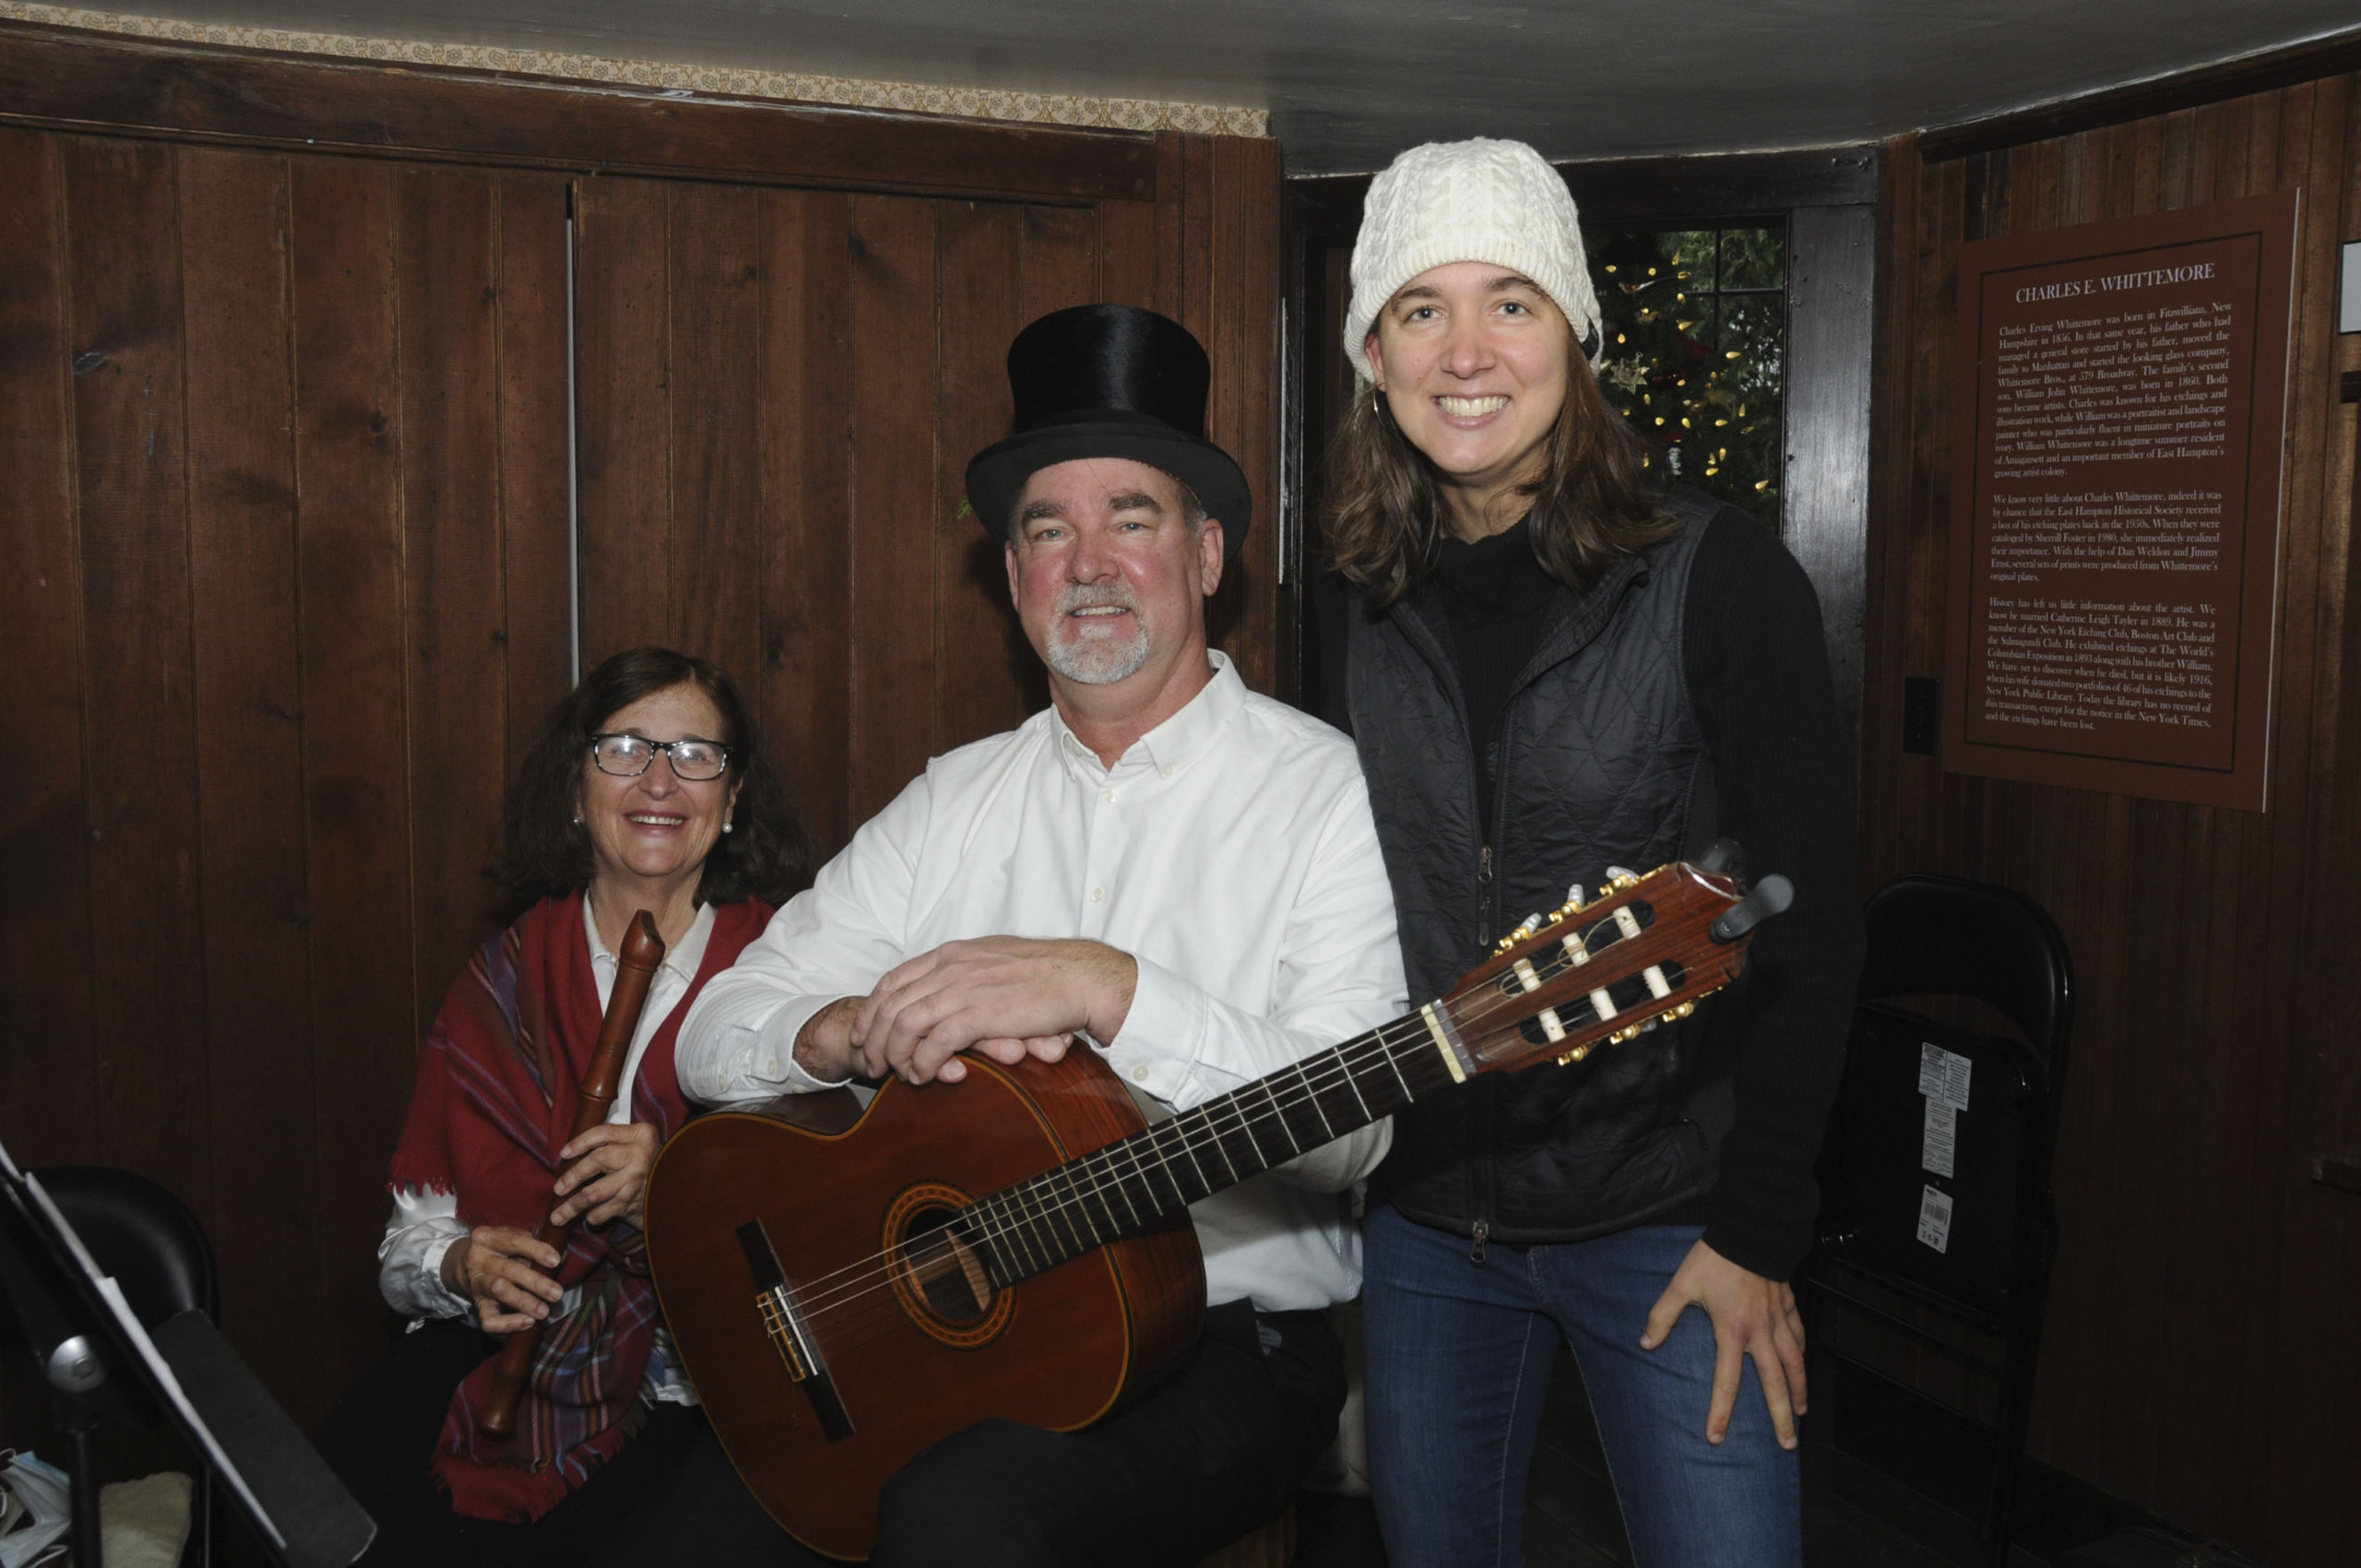 Marilyn's and Peter Van Scoyoc with their daughter Amy at a special musical performance  on Saturday as  part of Victorian Christmas at the Moran Studio.  From the balcony of the historic Moran studio, Peter and Marilyn Van Scoyoc performed an instrumental duet of traditional holiday music, similar to what might have been performed at a festive turn-of-the-century Moran holiday party.  Presented by the East Hampton Historical Society, experience the merriment, sights and sounds of a 19th century Victorian Christmas – on display through December 23rd! easthamptonhistory.org   RICHARD LEWIN